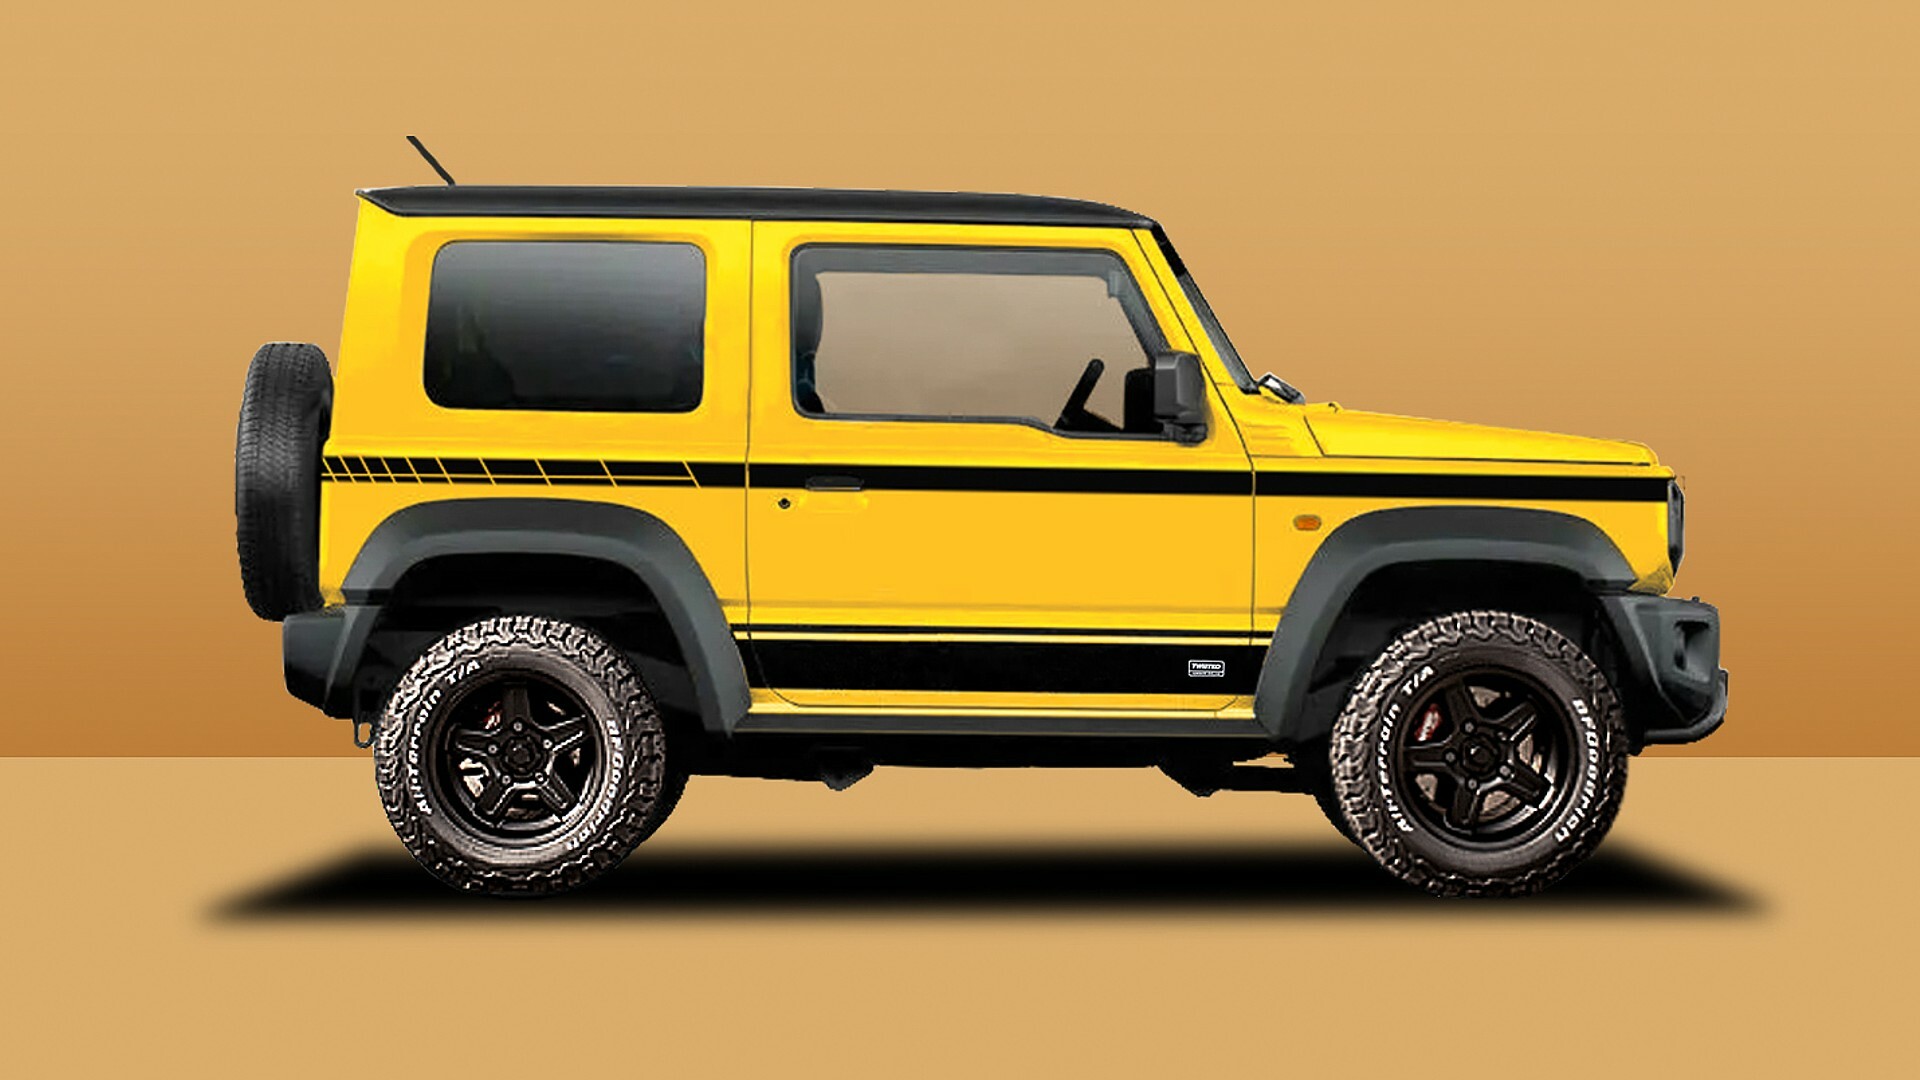 TWISTED AUTOMOTIVE ADDS SUZUKI JIMNY TO ITS PRODUCT OFFERING.